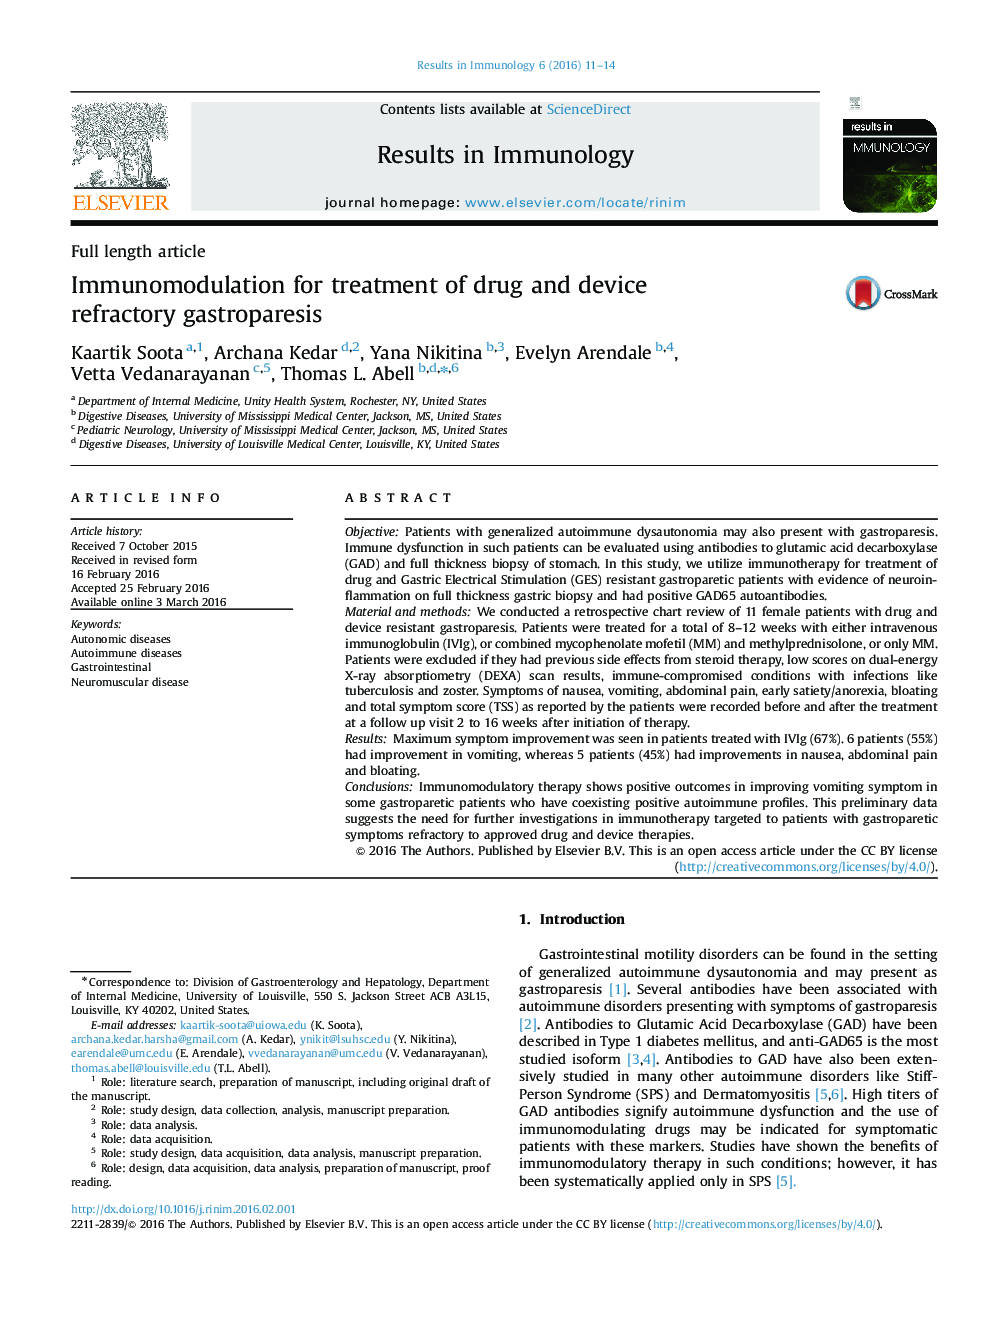 Immunomodulation for treatment of drug and device refractory gastroparesis